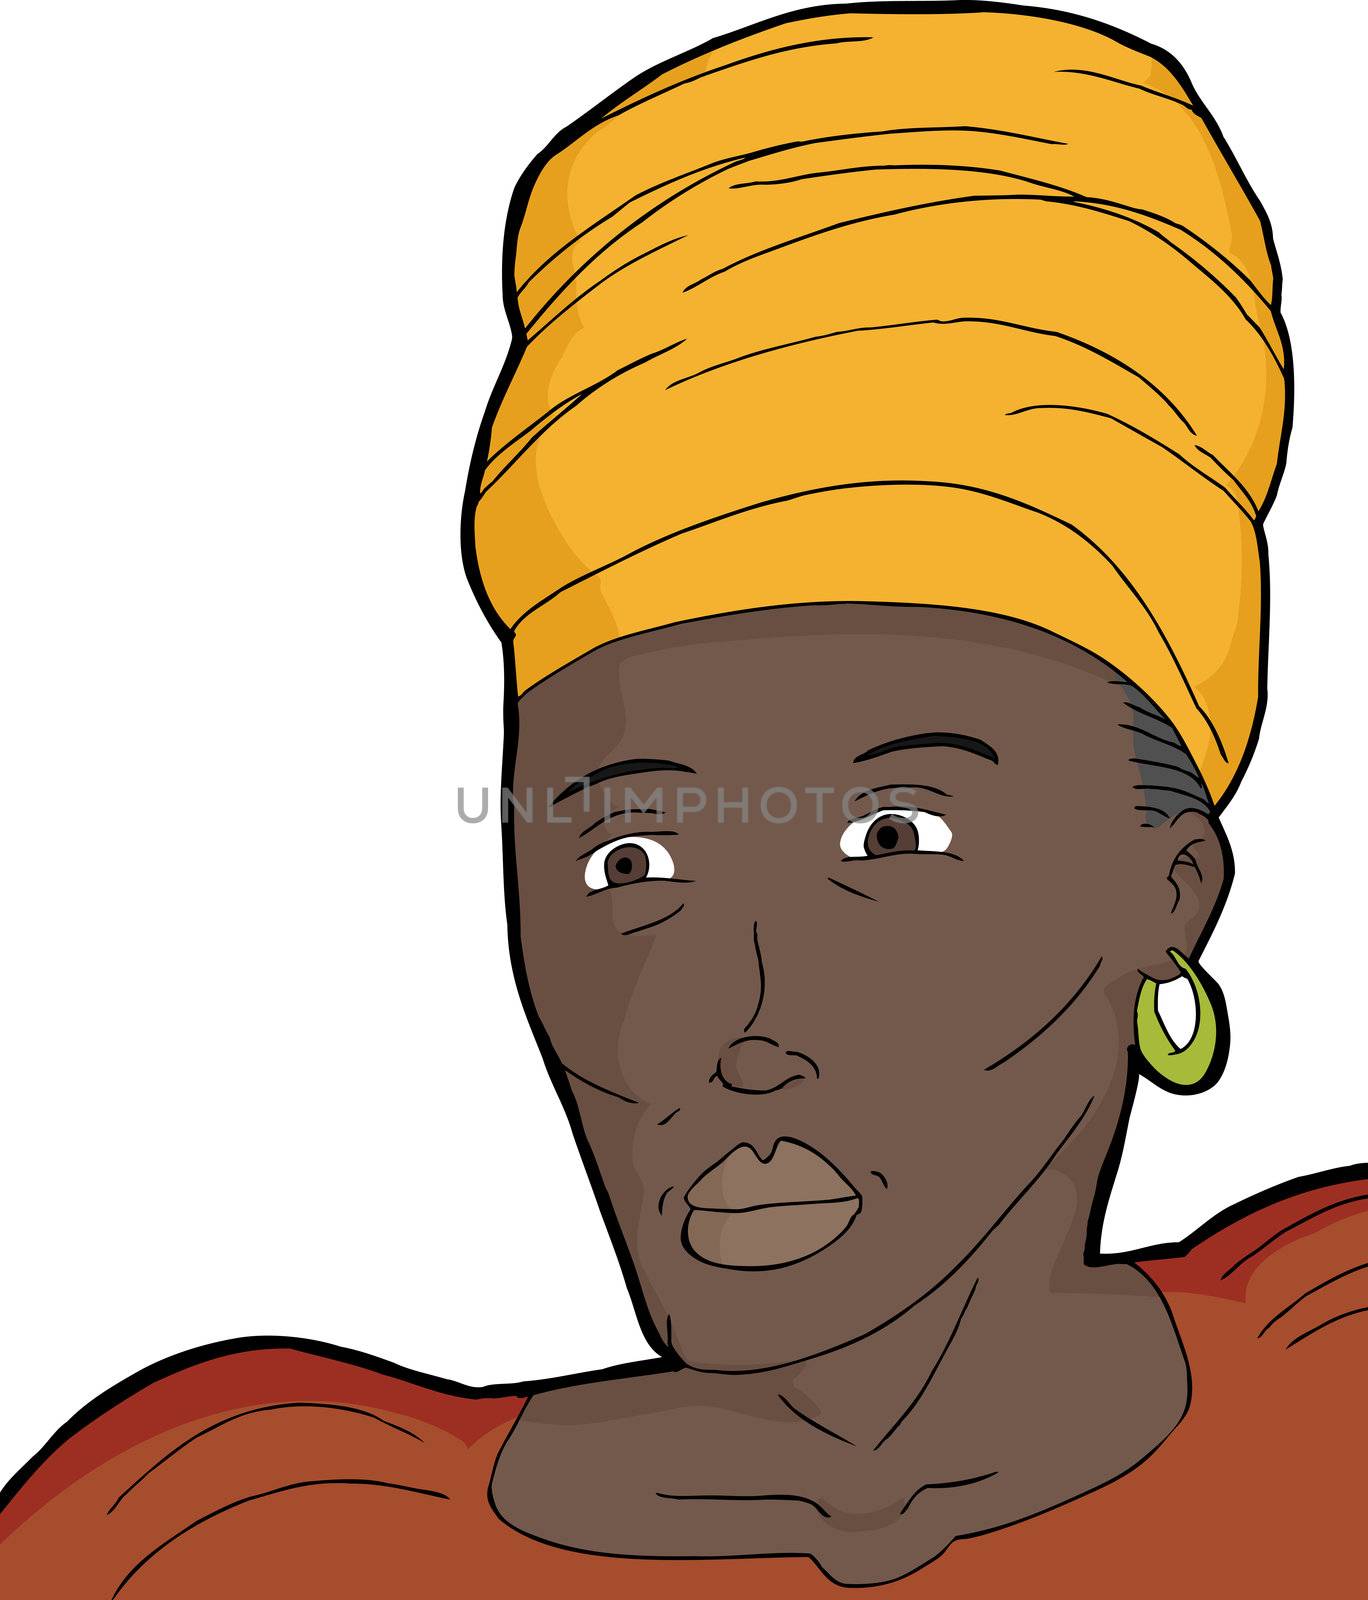 Muslim woman in traditional African clothing over white background